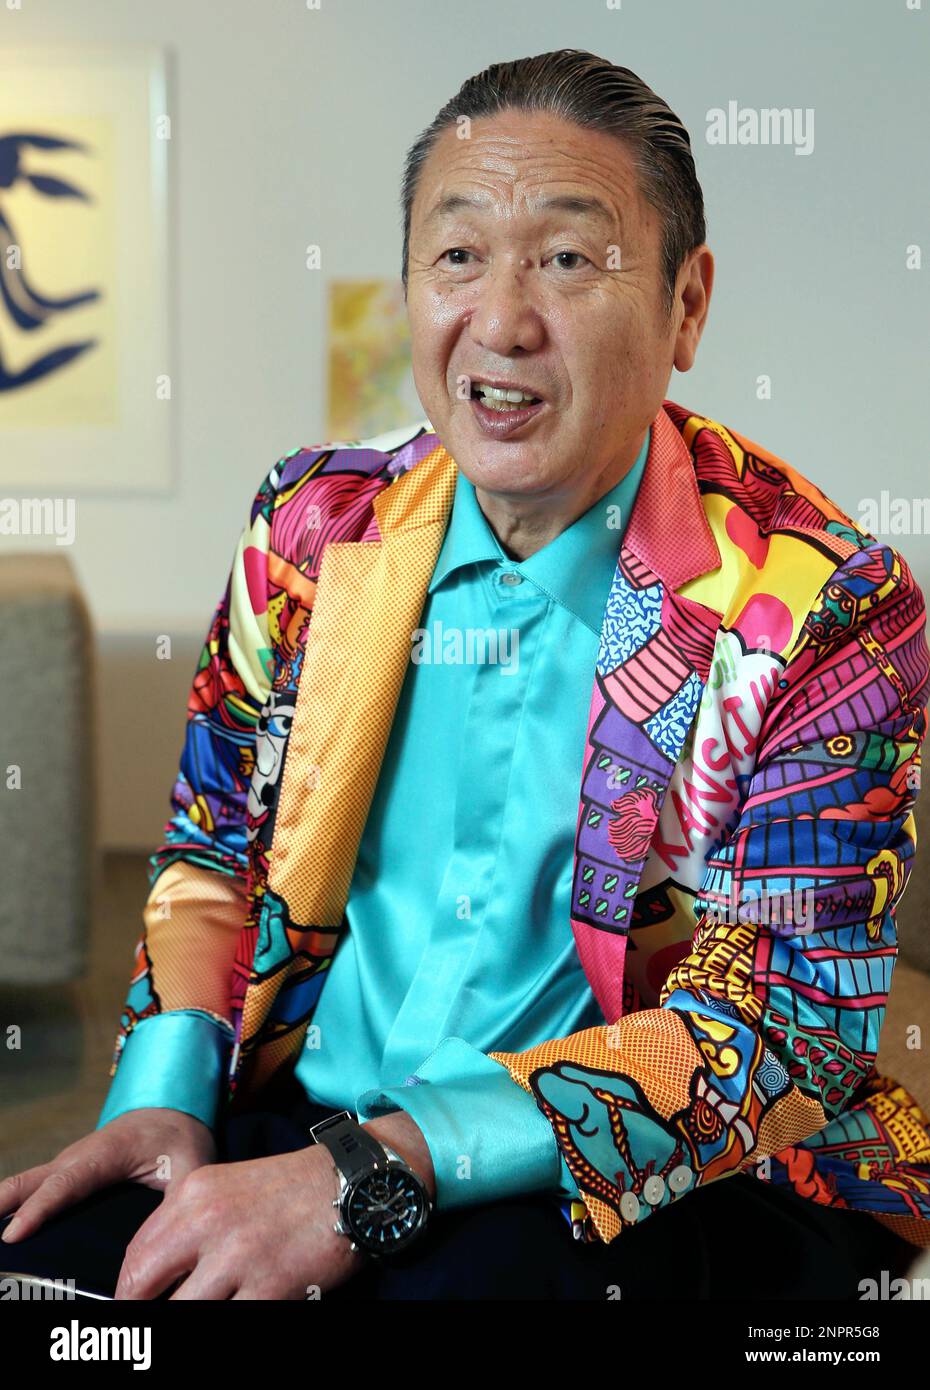 https://c8.alamy.com/comp/2NPR5G8/a-file-photo-shows-japanese-fashion-designer-kansai-yamamoto-speaks-during-an-interview-in-tokyo-on-april-23-2013-76-year-old-yamamoto-made-his-debut-in-1971-as-the-first-japanese-and-participated-in-tokyo-new-york-and-paris-fashion-collection-from-1974-to-1992-according-to-yamamotos-office-he-died-of-acute-myelogenous-leukemia-on-july-21st-the-yomiuri-shimbun-via-ap-images-2NPR5G8.jpg